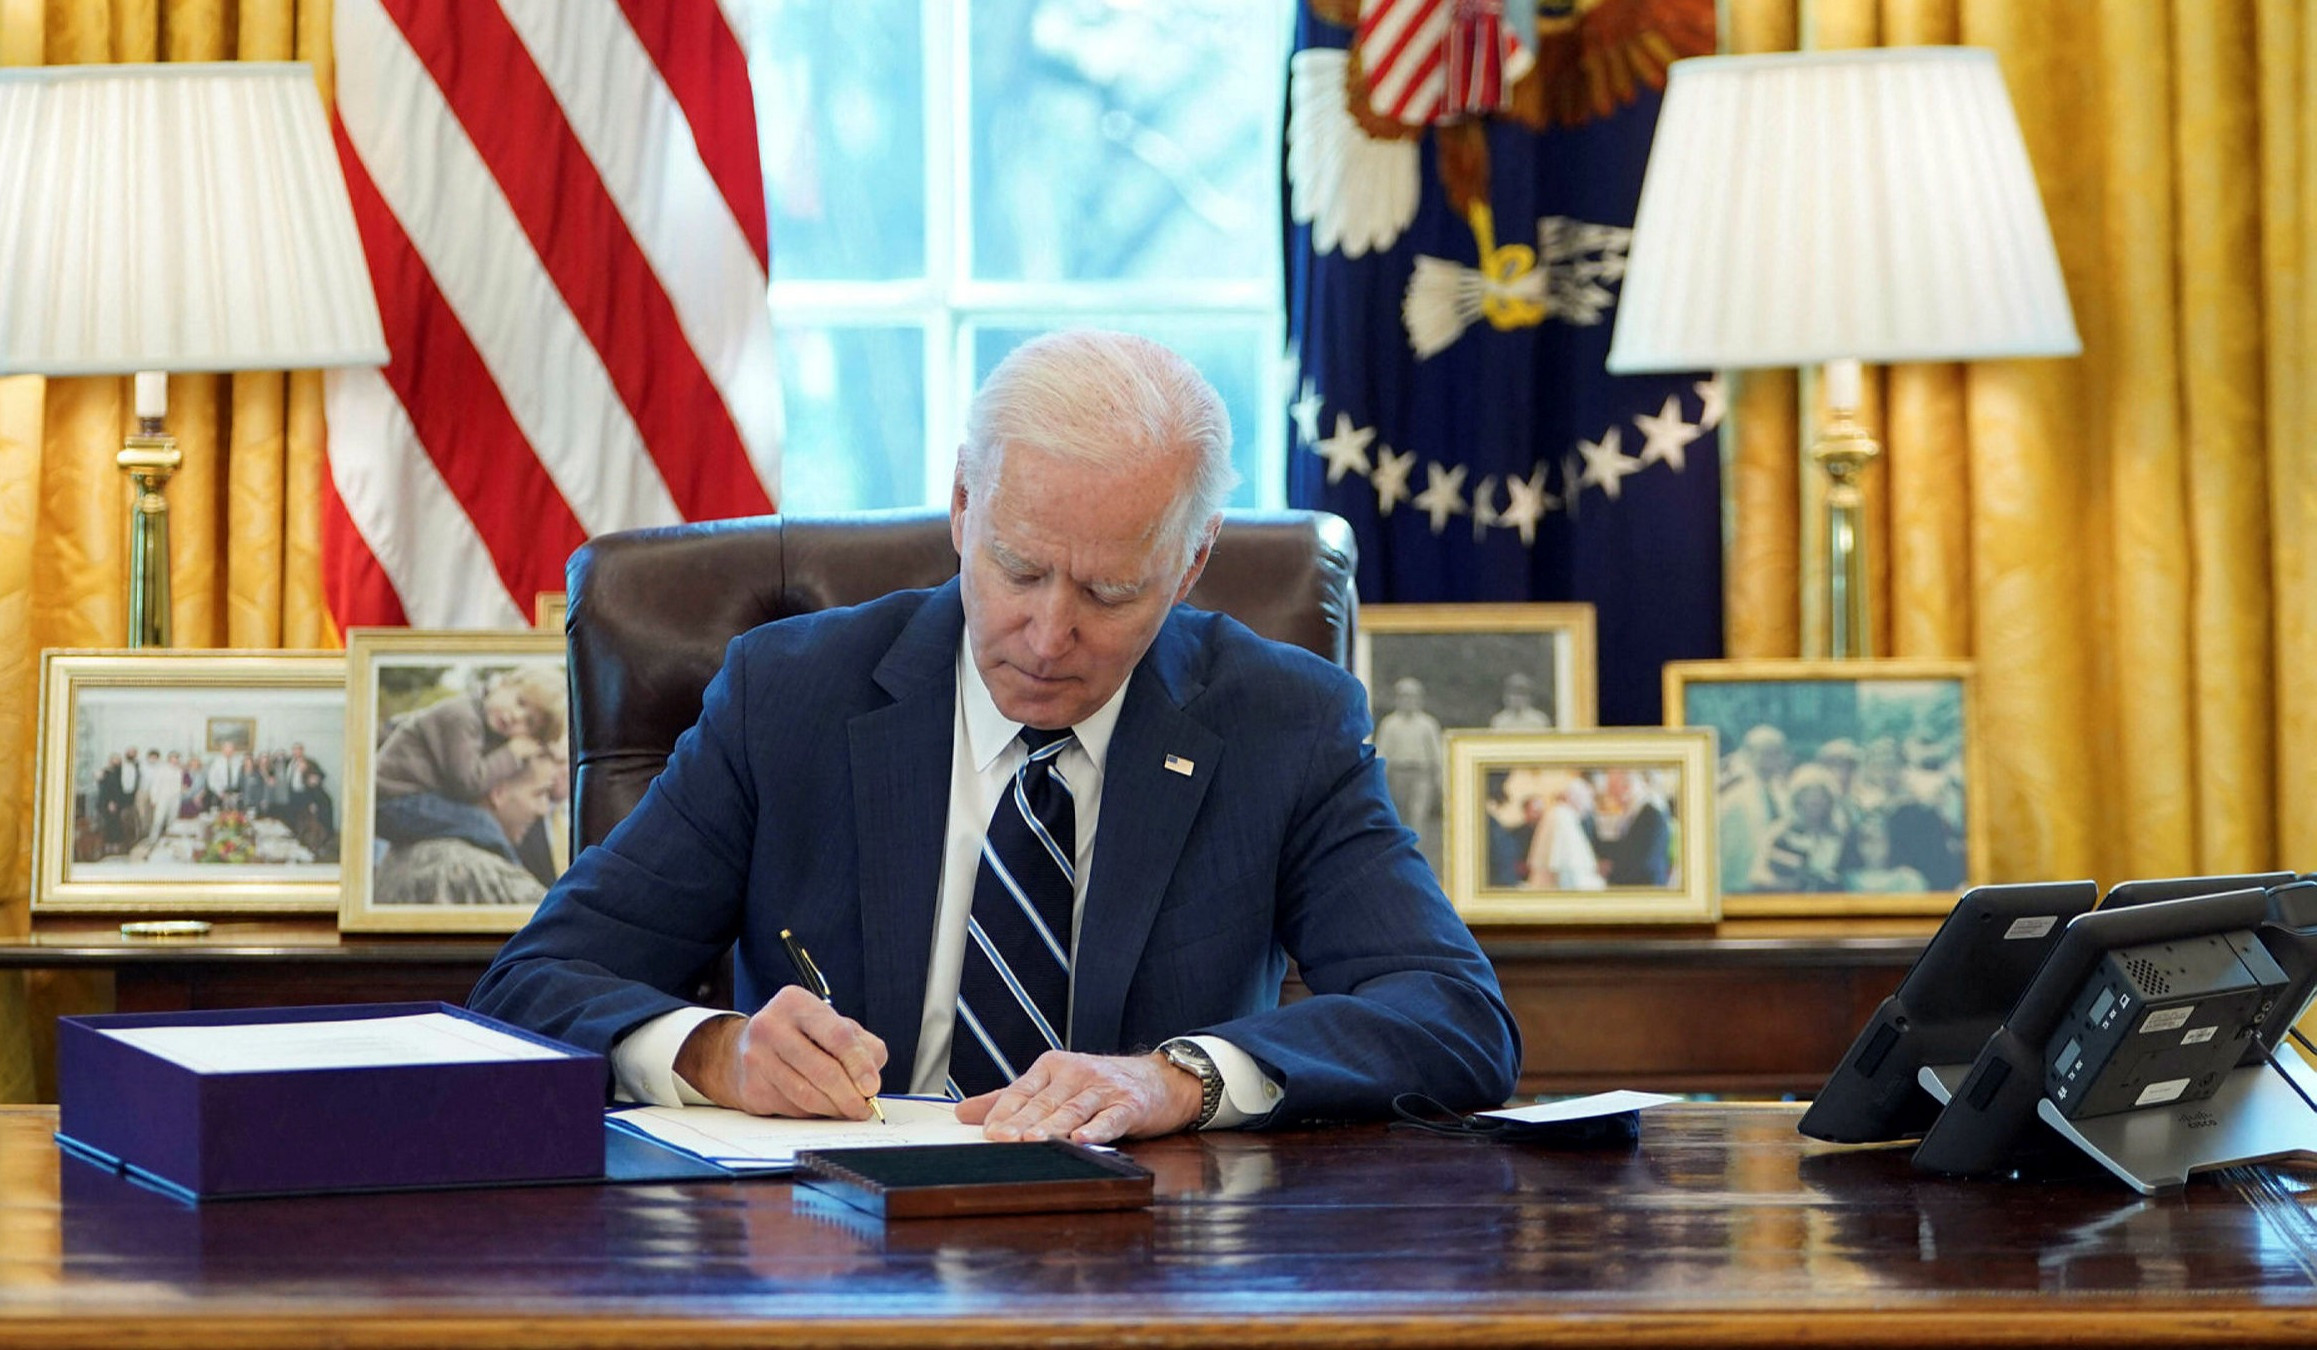 Biden signs Lend-Lease military aid bill on arms supply to Ukraine: White House